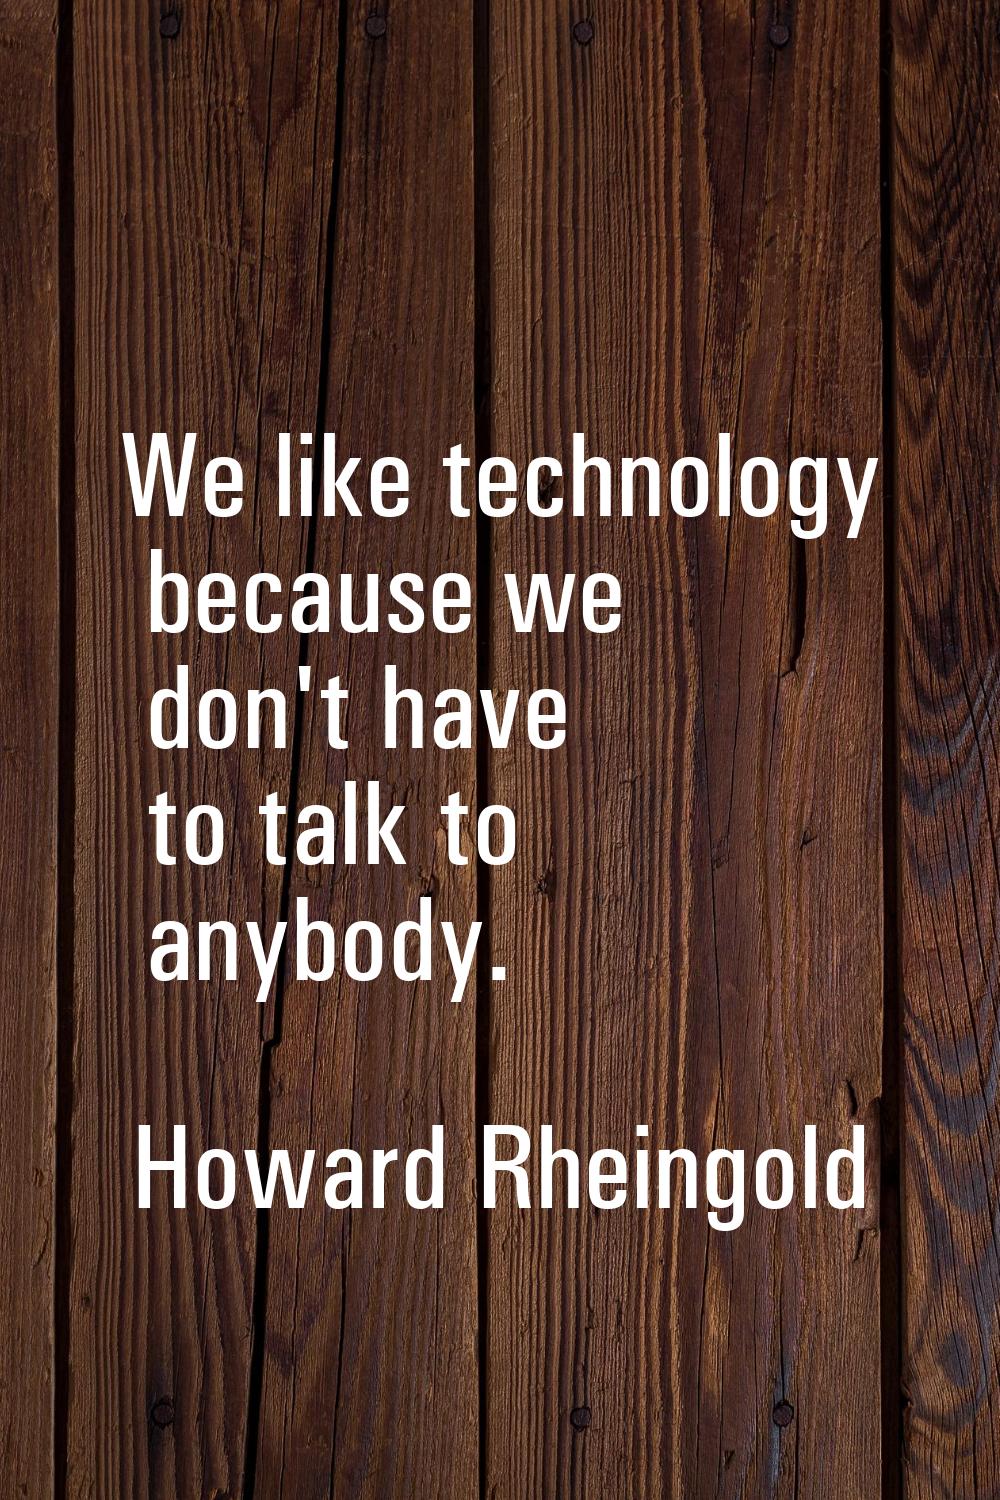 We like technology because we don't have to talk to anybody.